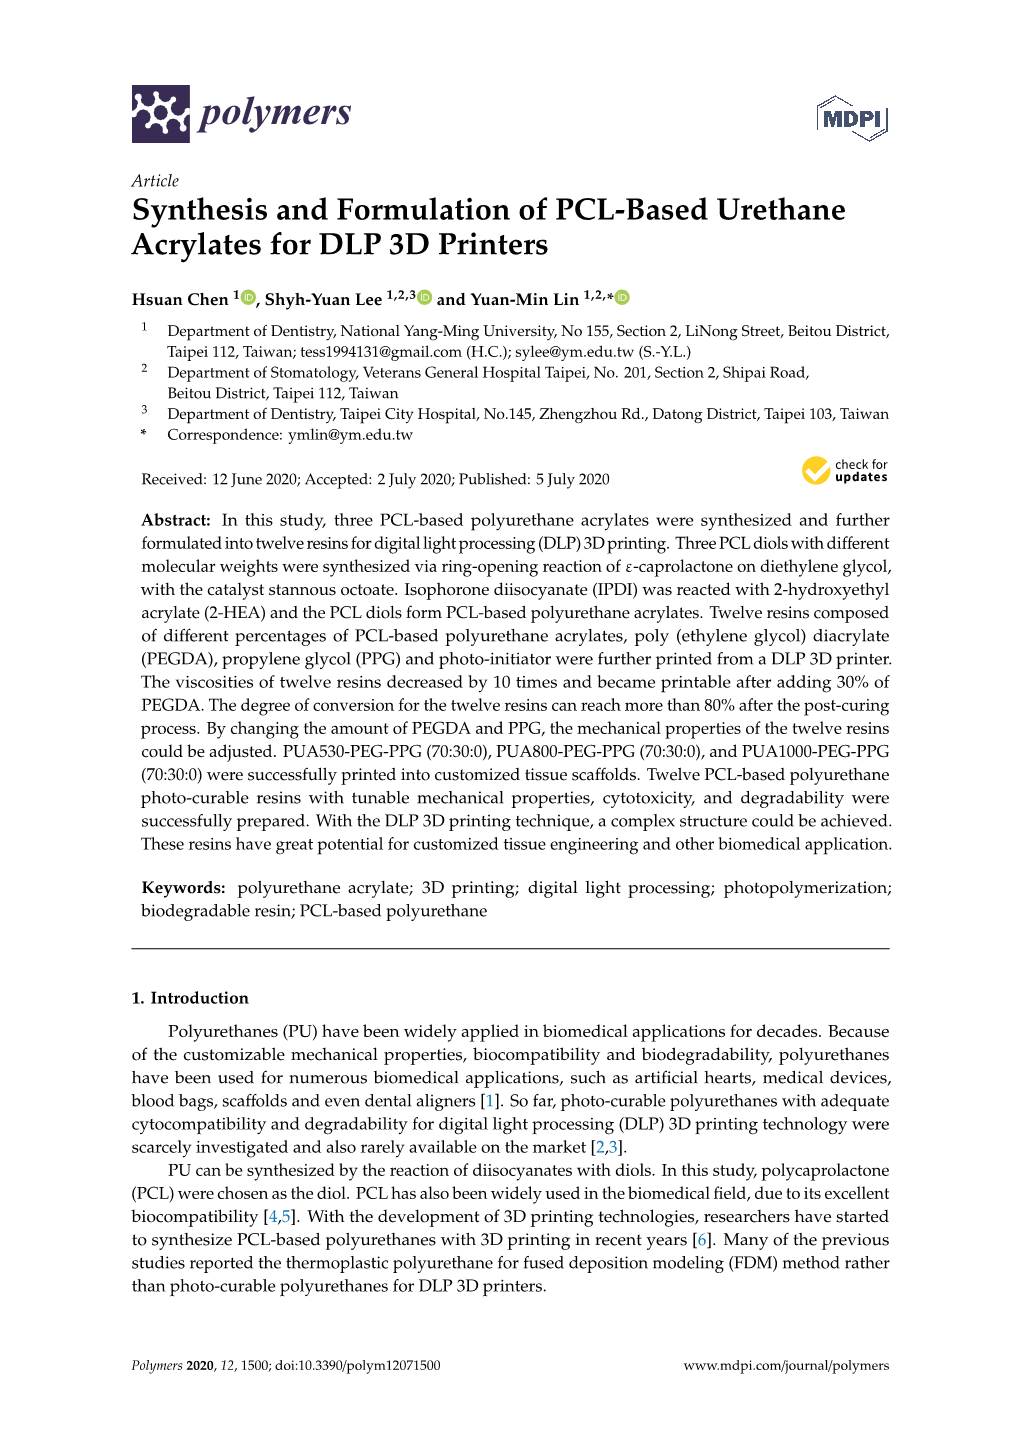 Synthesis and Formulation of PCL-Based Urethane Acrylates for DLP 3D Printers